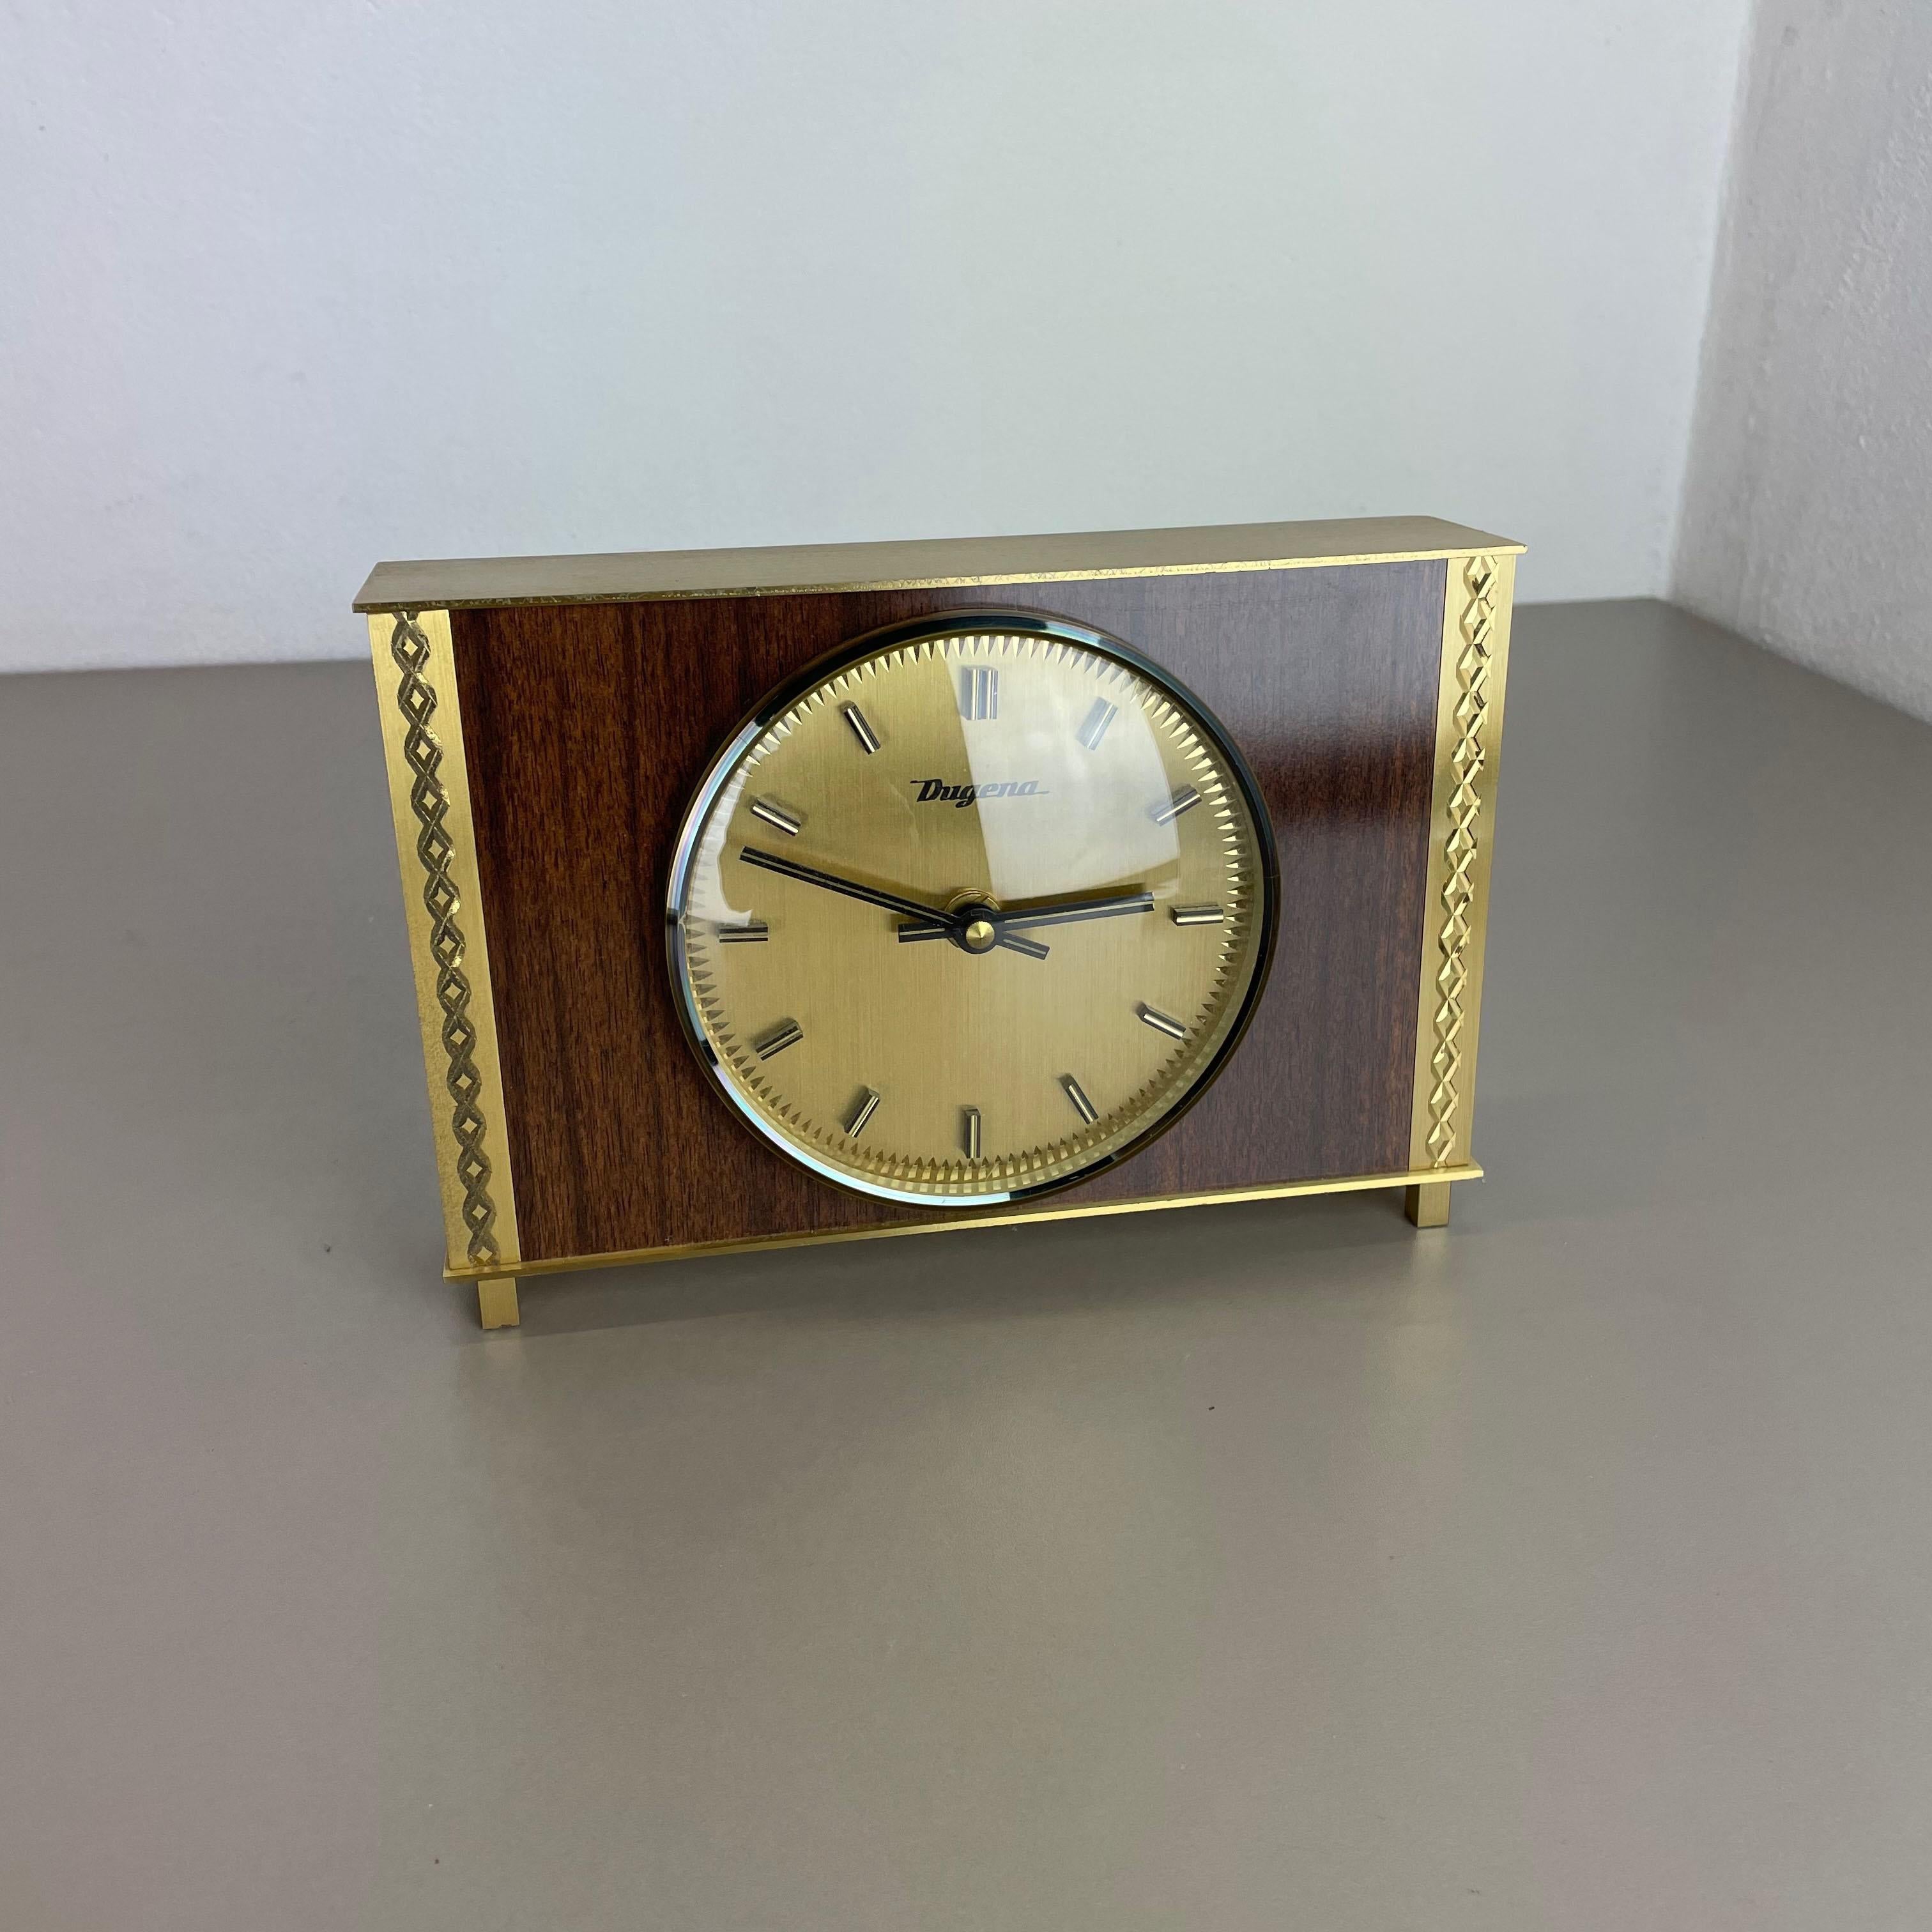 Article:

Table clock



Origin:

Germany


Producer:

Dugena, Germany


Age:

1960s





This original wooden table clock was produced in the 1960s by the premium clock producer Dugena in Germany. The clock is original